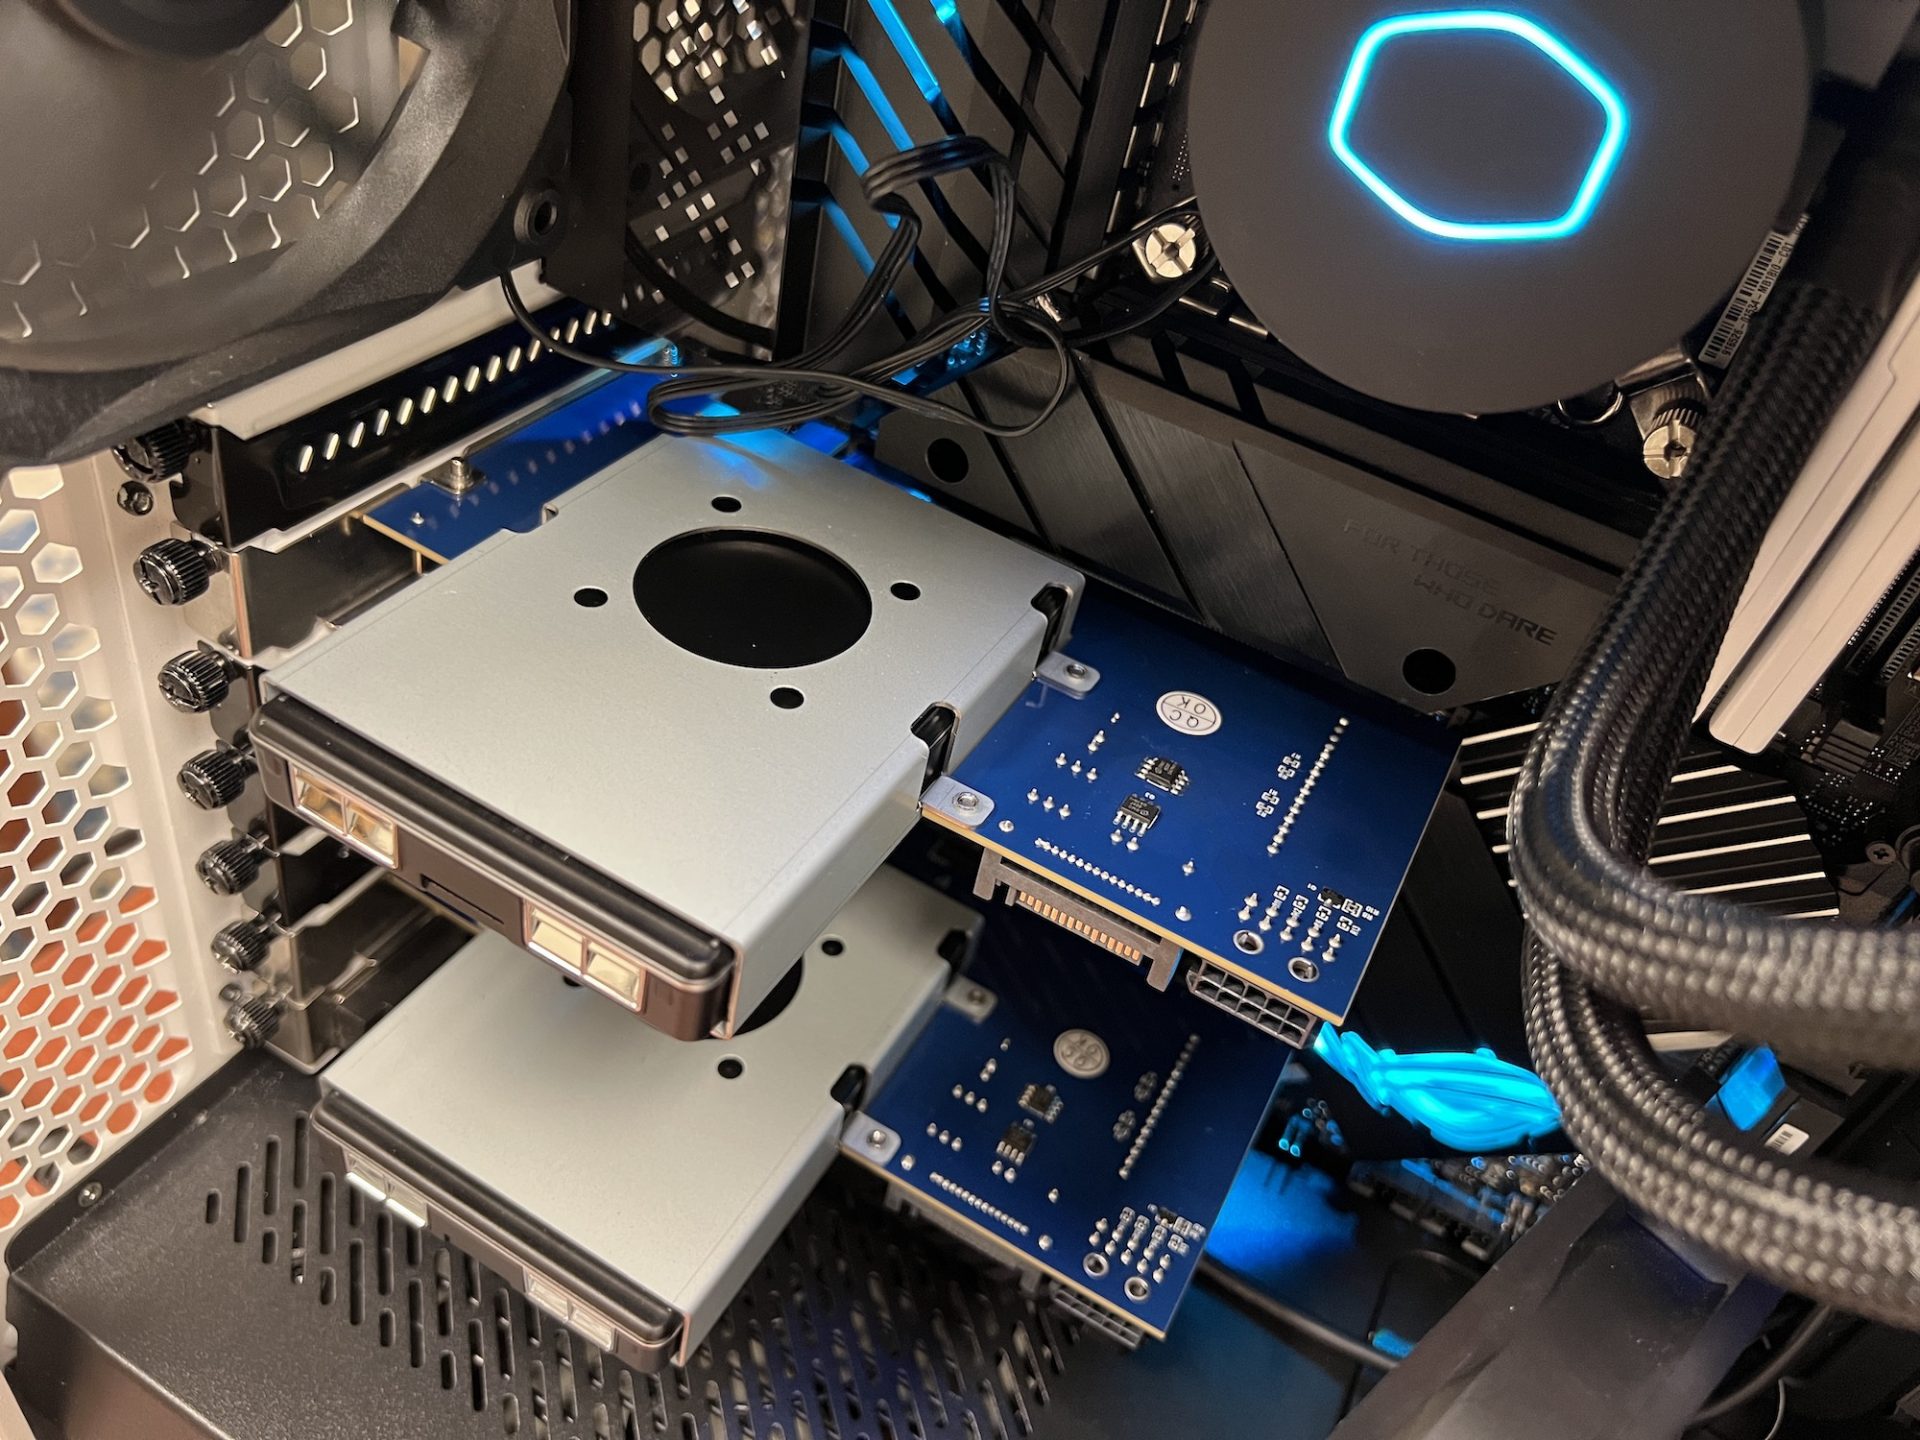 The first PCIe Gen 5 drives are here and fast, but do you have a